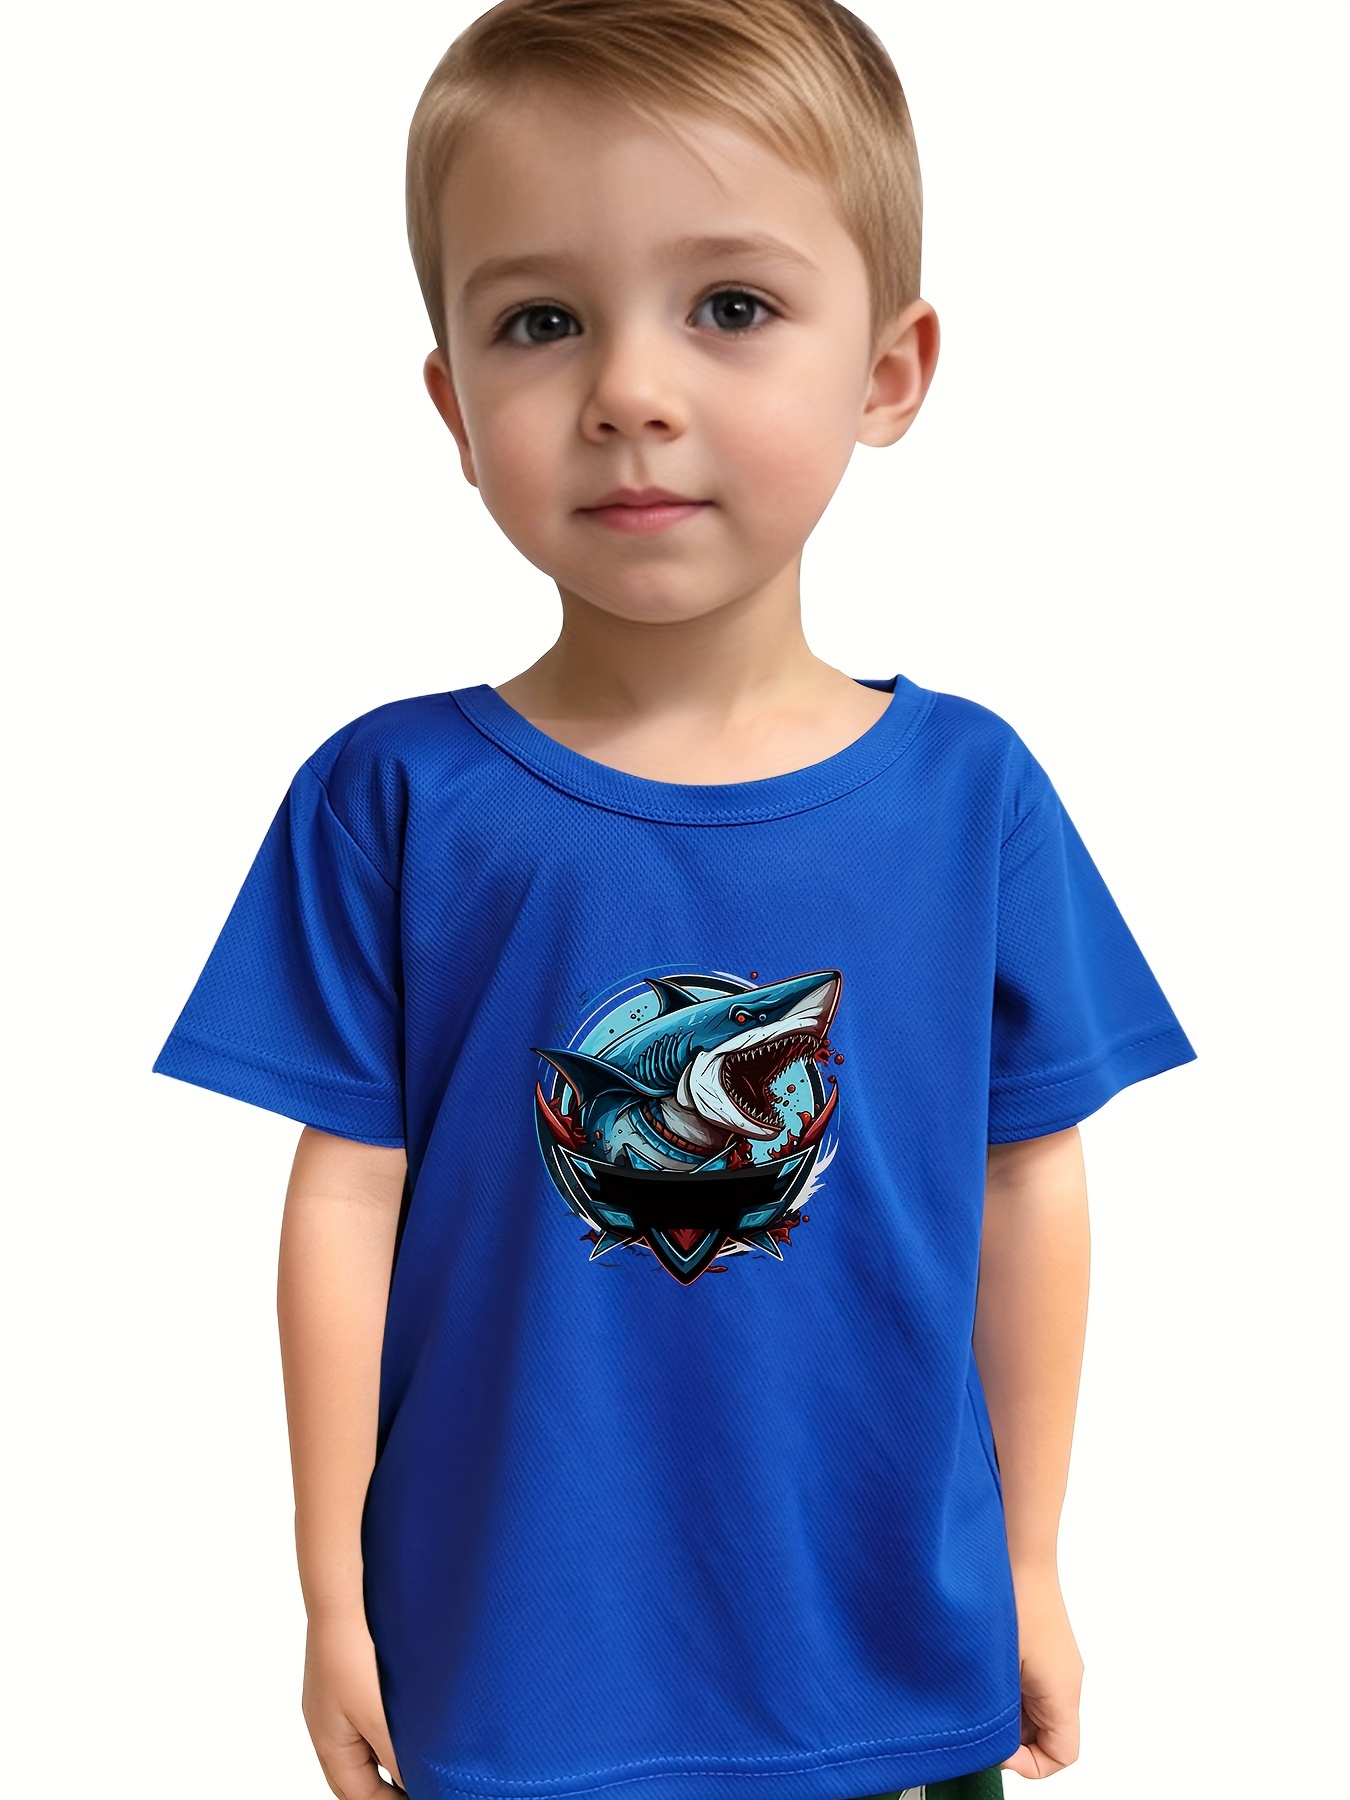  Short Kids Clothes Boys T Toddler Tee Sharks for 17